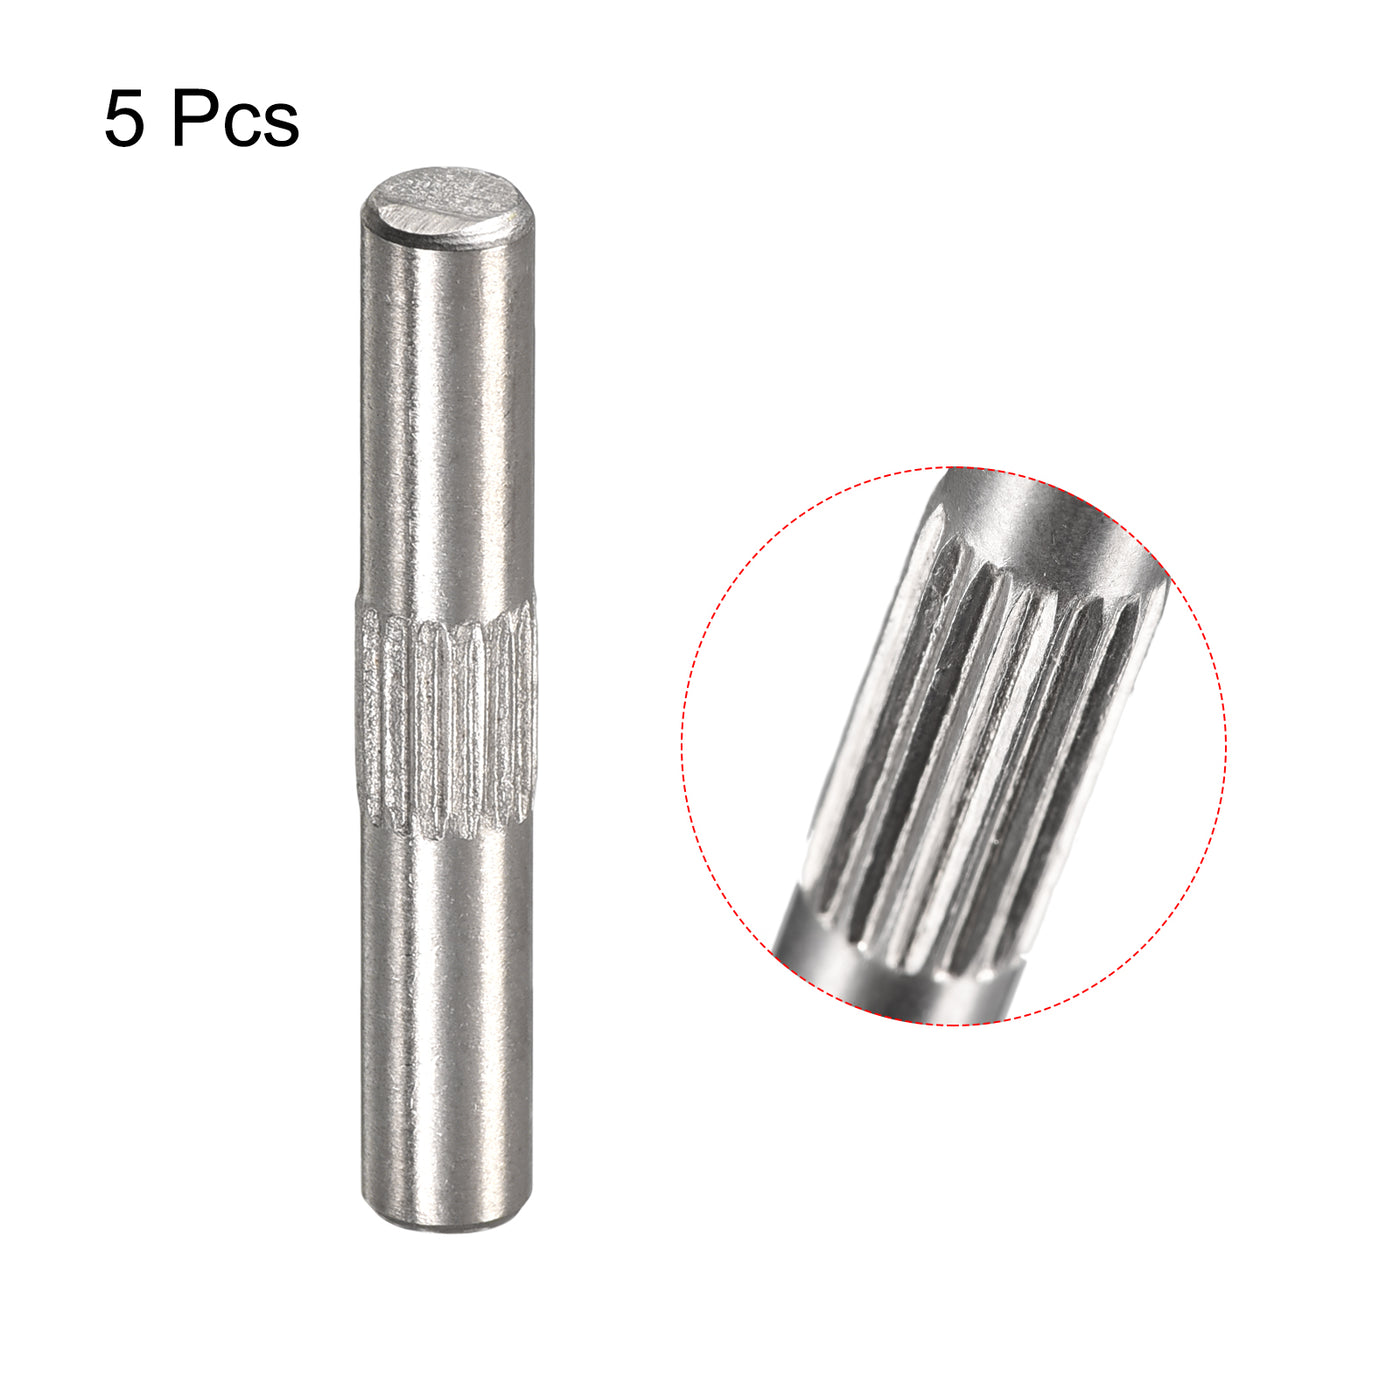 uxcell Uxcell 4x25mm 304 Stainless Steel Dowel Pins, 5Pcs Center Knurled Chamfered End Pin